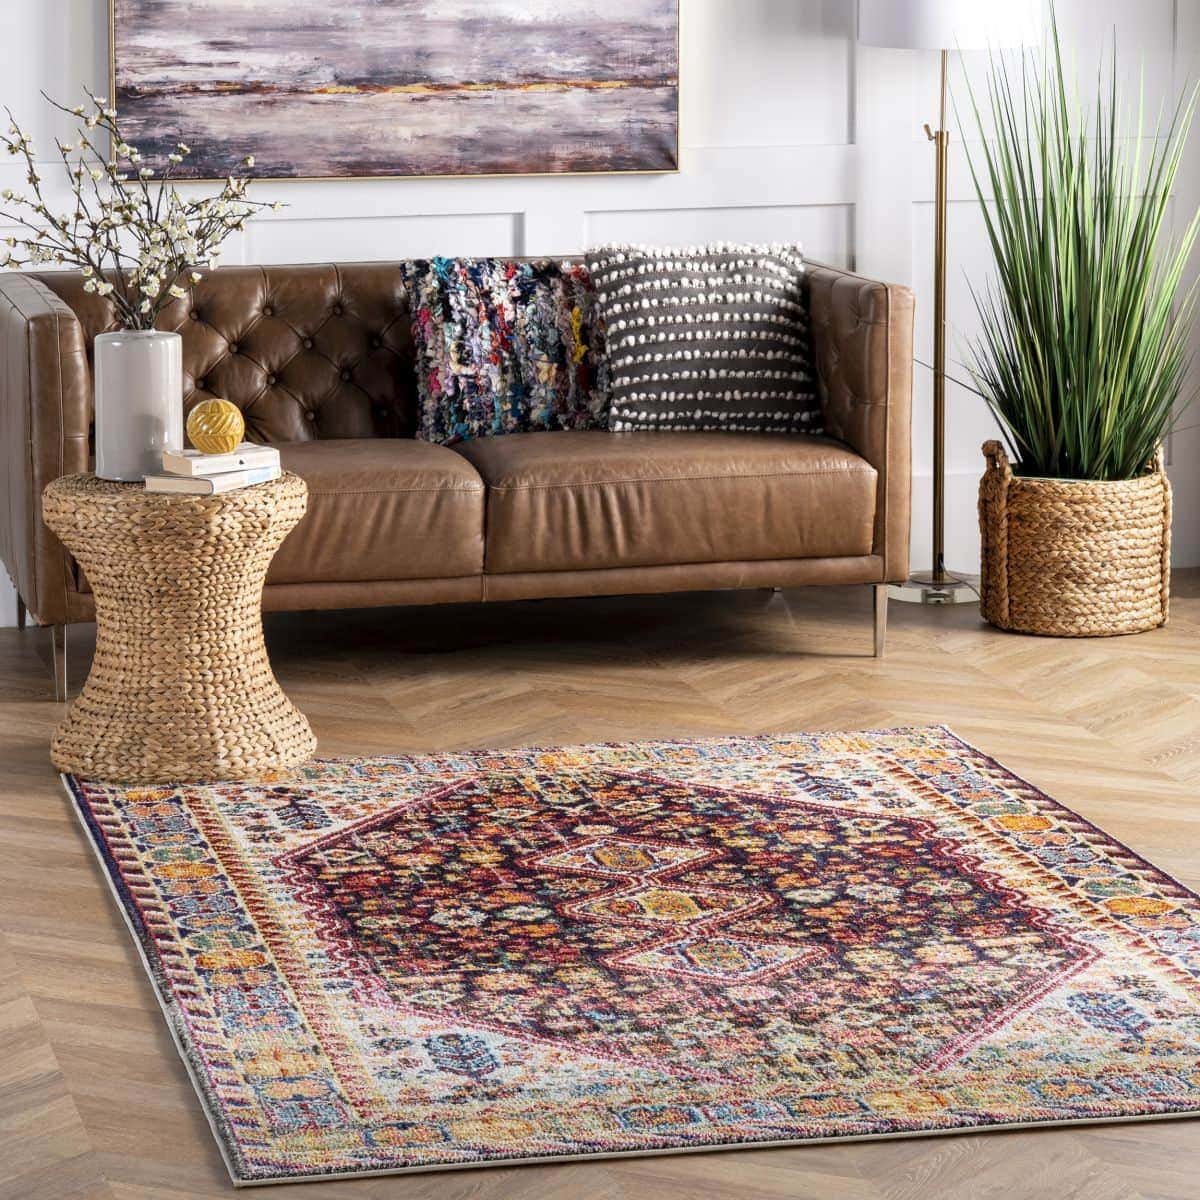 25 Gorgeous Rugs That Go With Brown Couches, Leather Area Rug Design Ideas